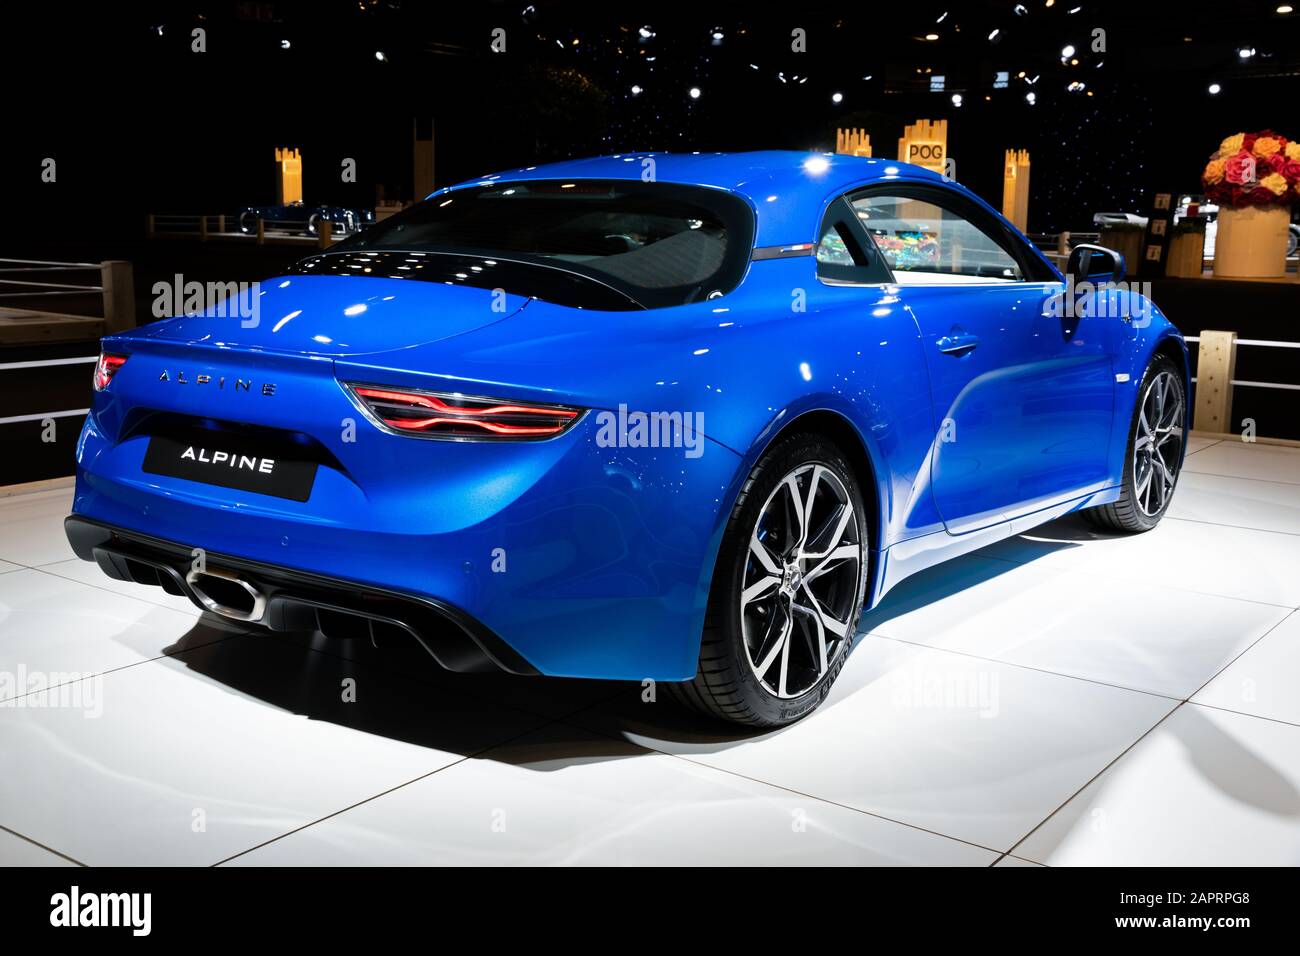 BRUSSELS - JAN 9, 2020: Alpine A110 sports car showcased at the Brussels  Autosalon 2020 Motor Show Stock Photo - Alamy